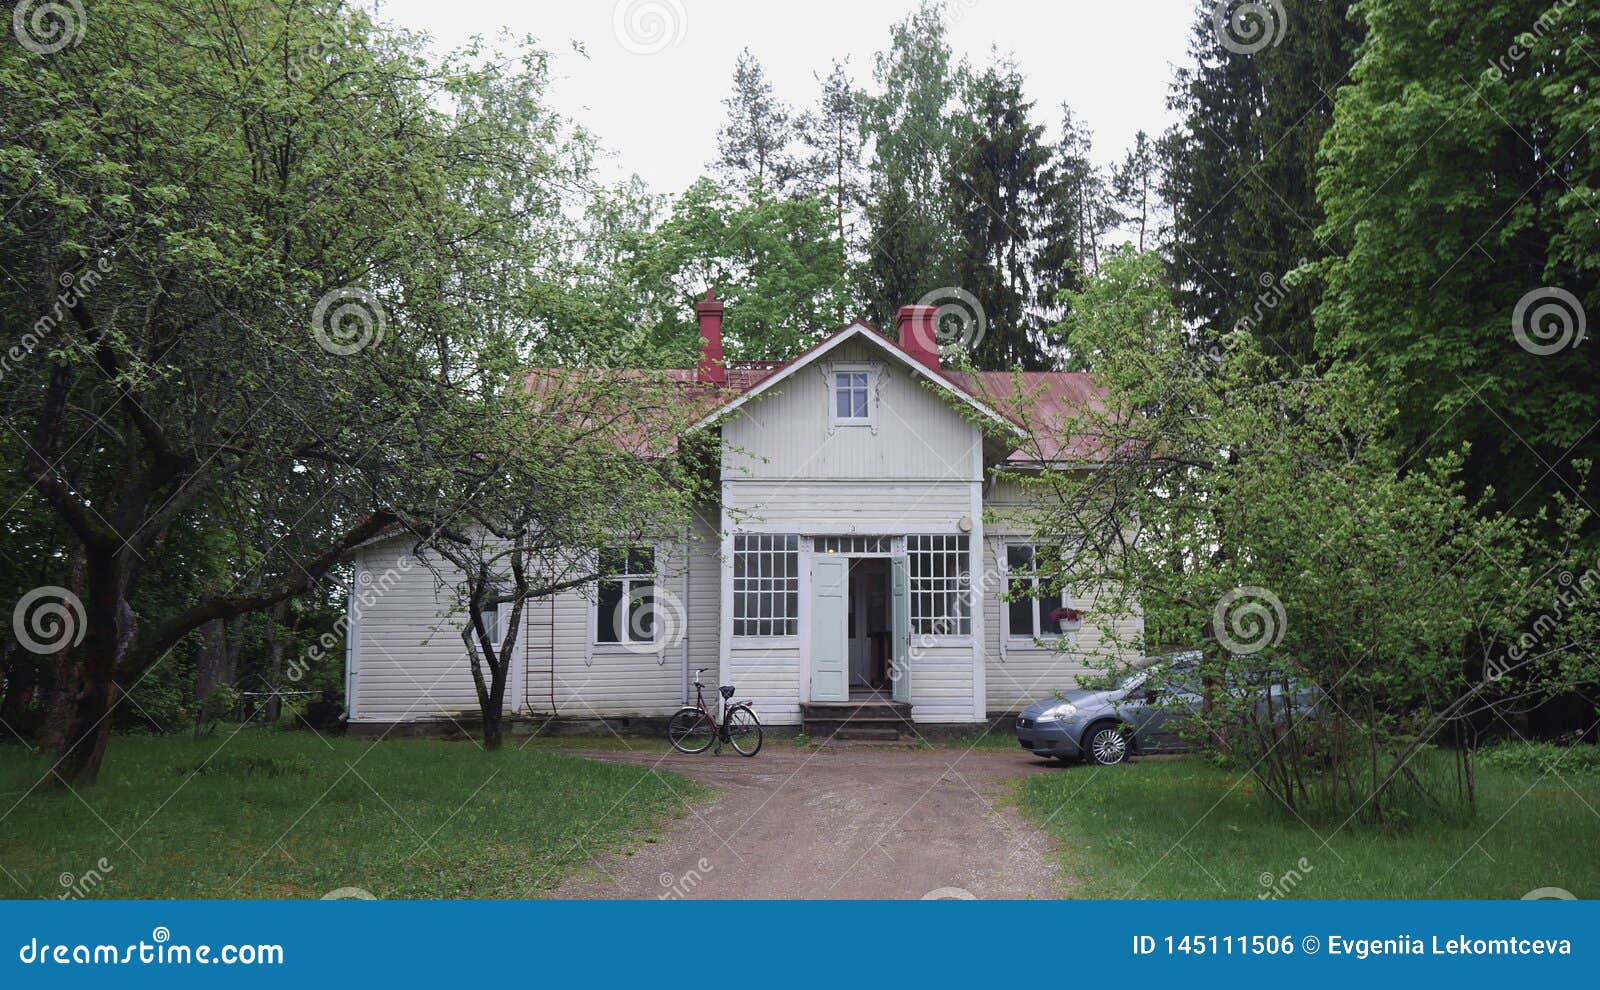 Beautiful Little White House In The Woods The House Has A Bicycle And A Car There Is A Path To The House No People Stock Photo Image Of Outdoor Chimney 145111506